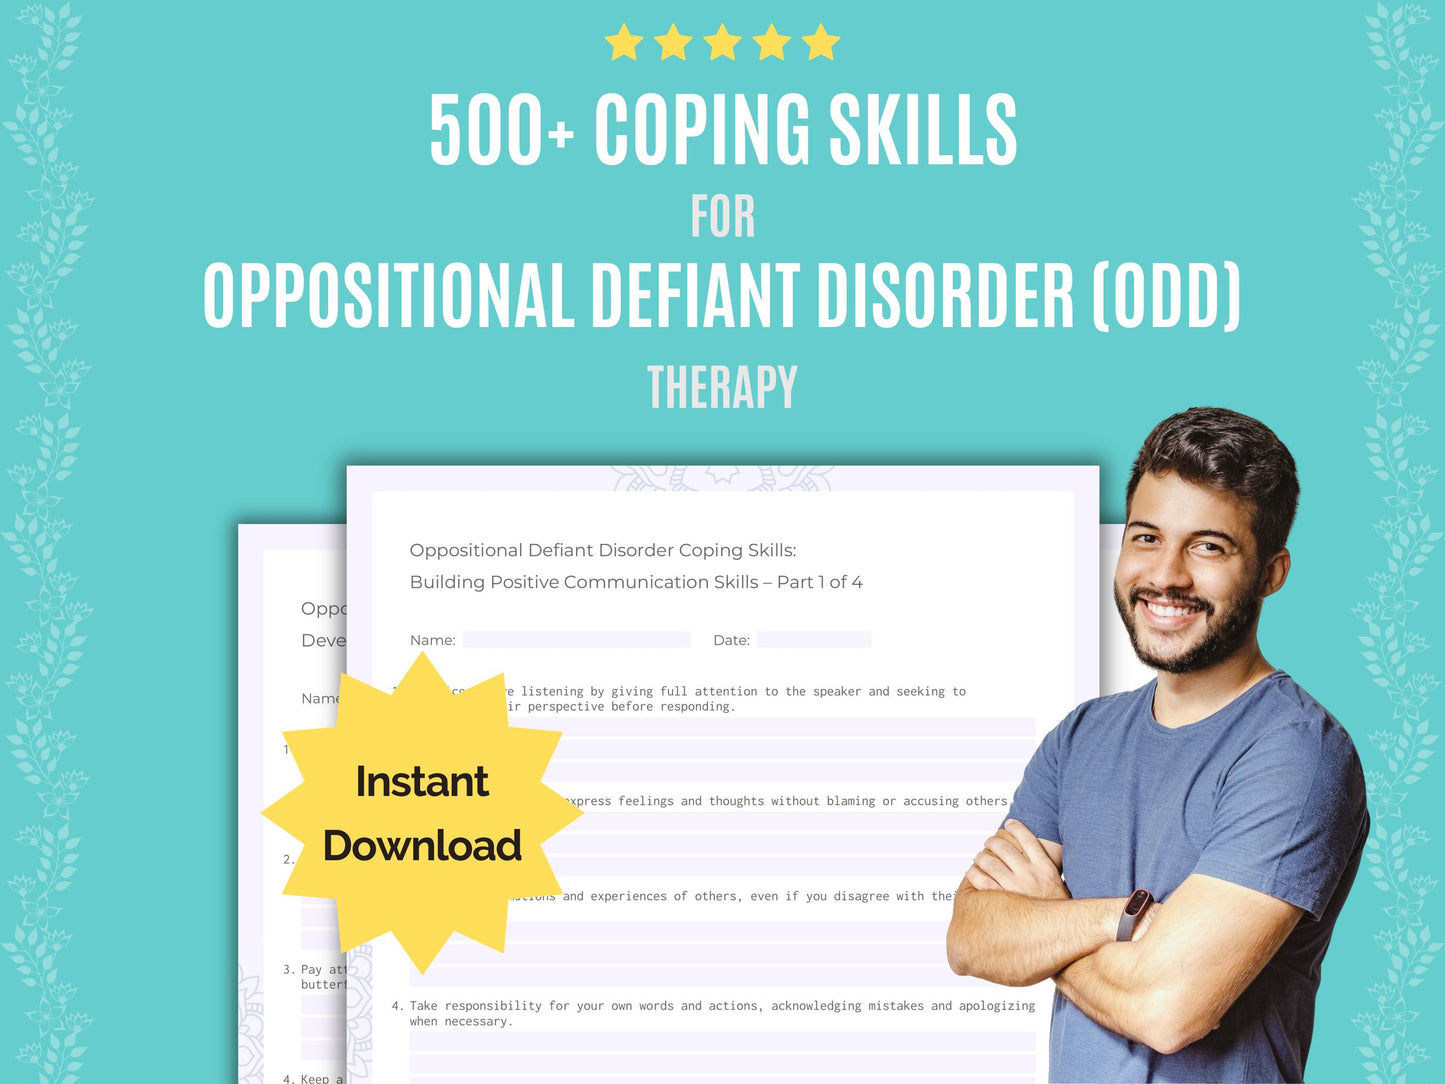 Oppositional Defiant Disorder (ODD) Coping Skills Resource